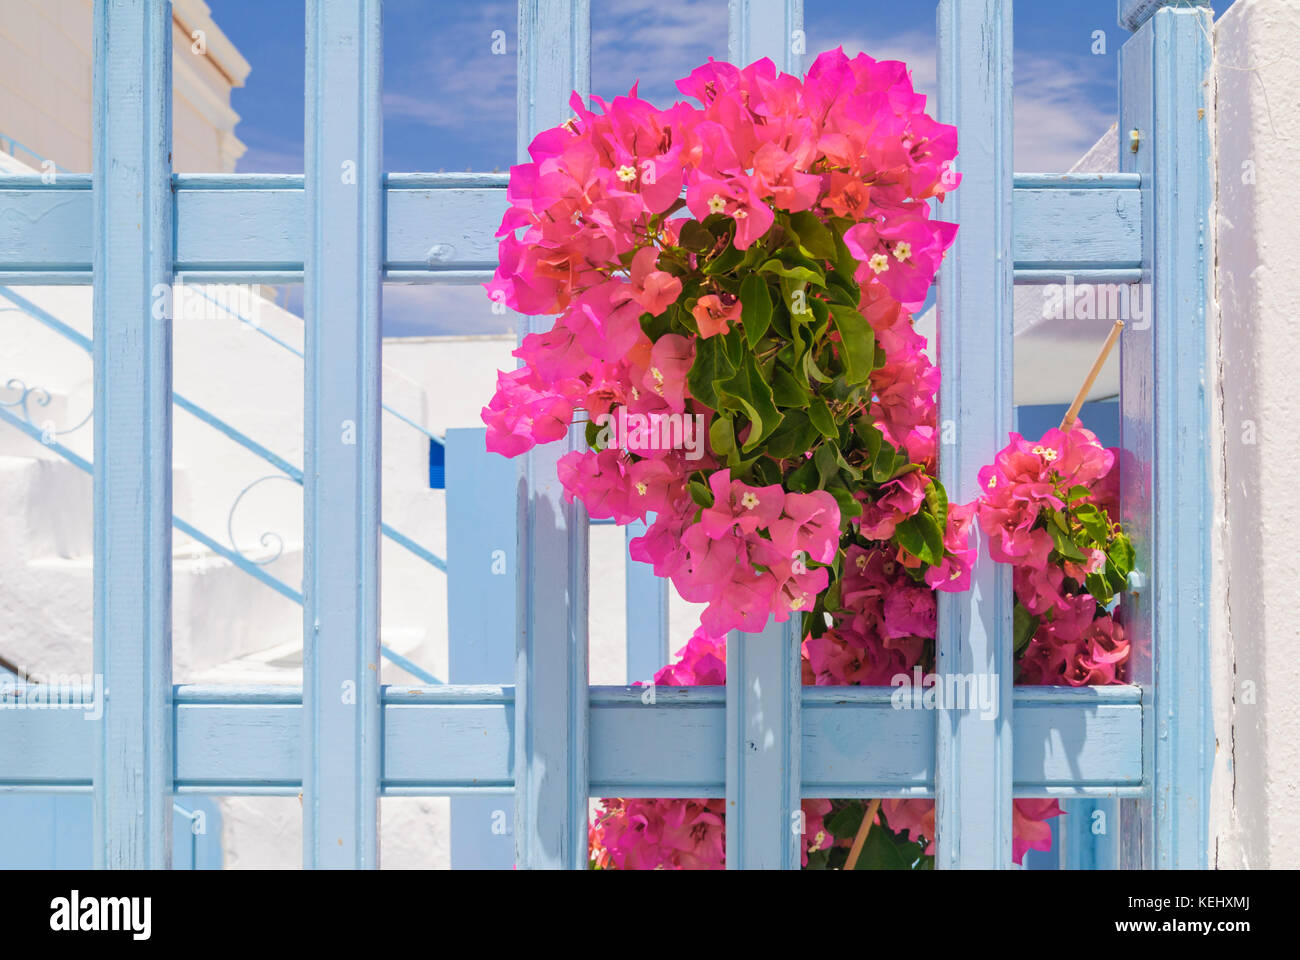 Pink Bougainvillea climbs through a blue picket fence against a whitewashed house in Paros, Greece Stock Photo